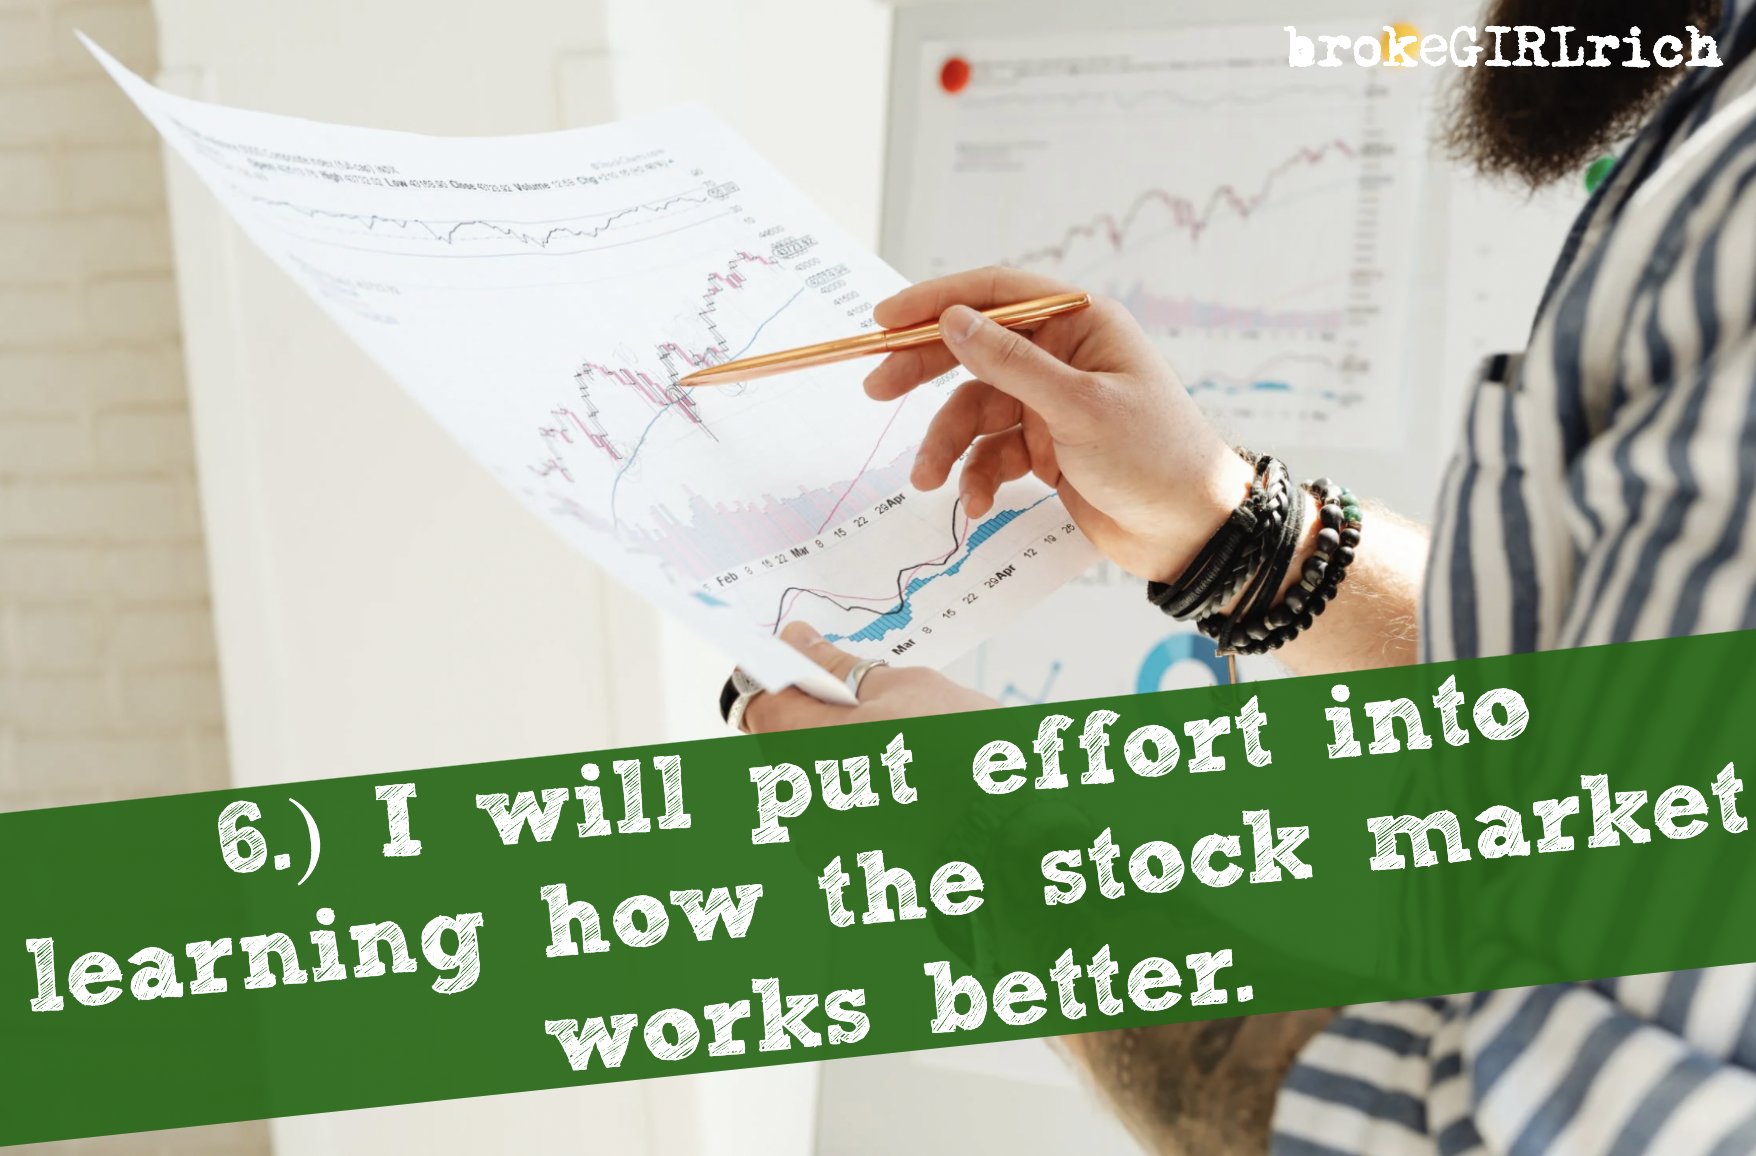 6.) I will put effort into learning how the stock market works better.